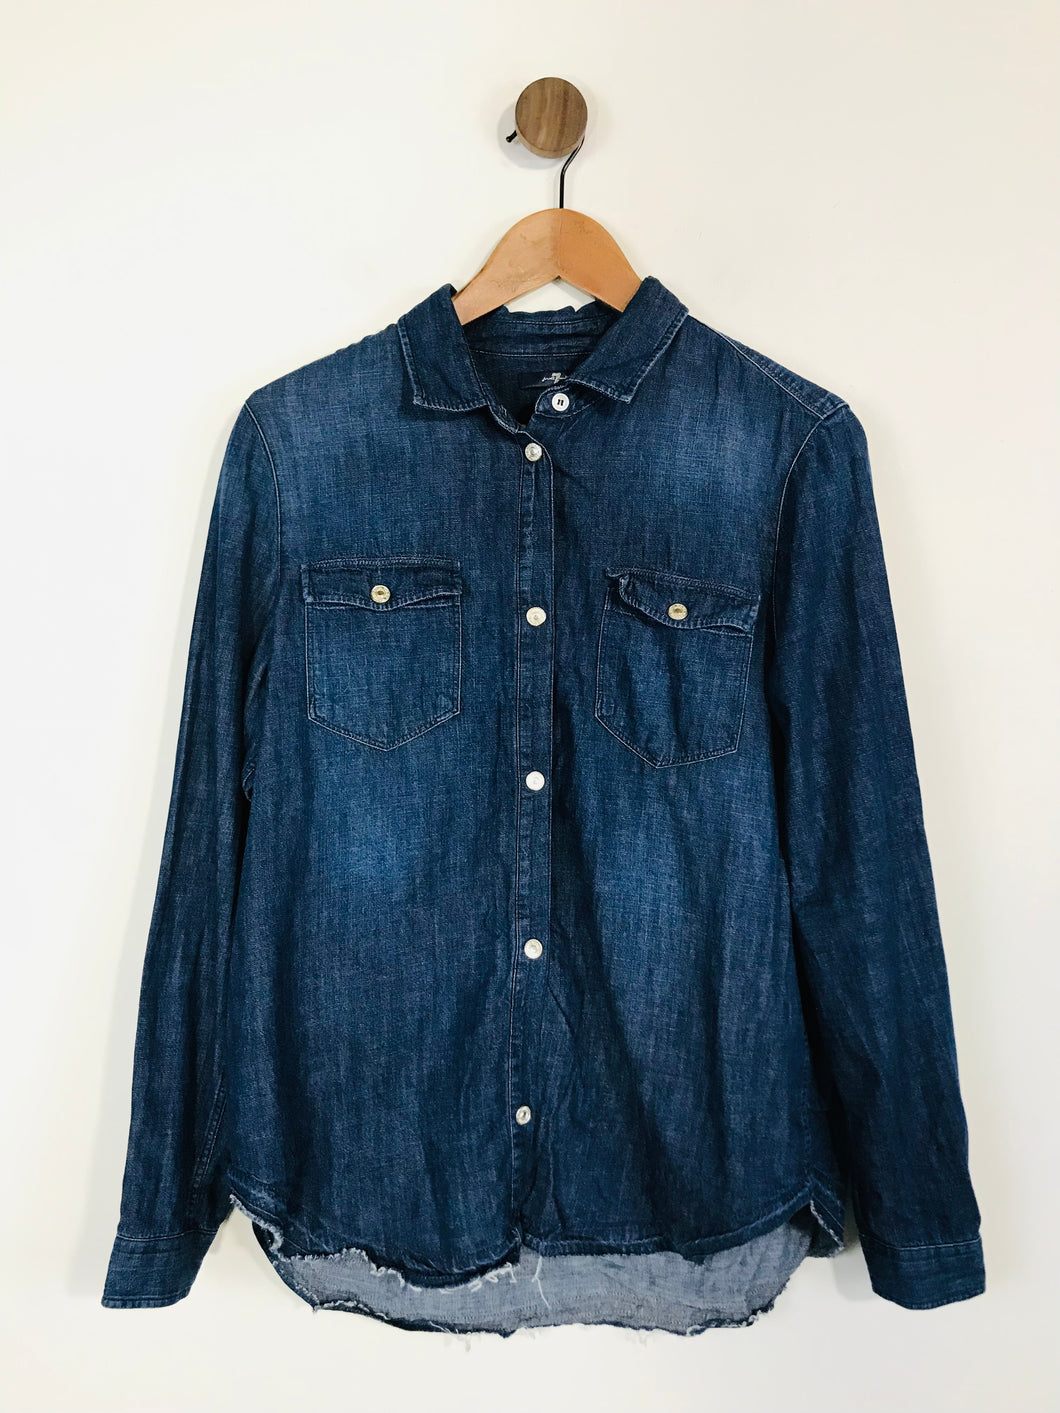 7 For All Mankind Women's Chambray Button-Up Shirt | M UK10-12 | Blue